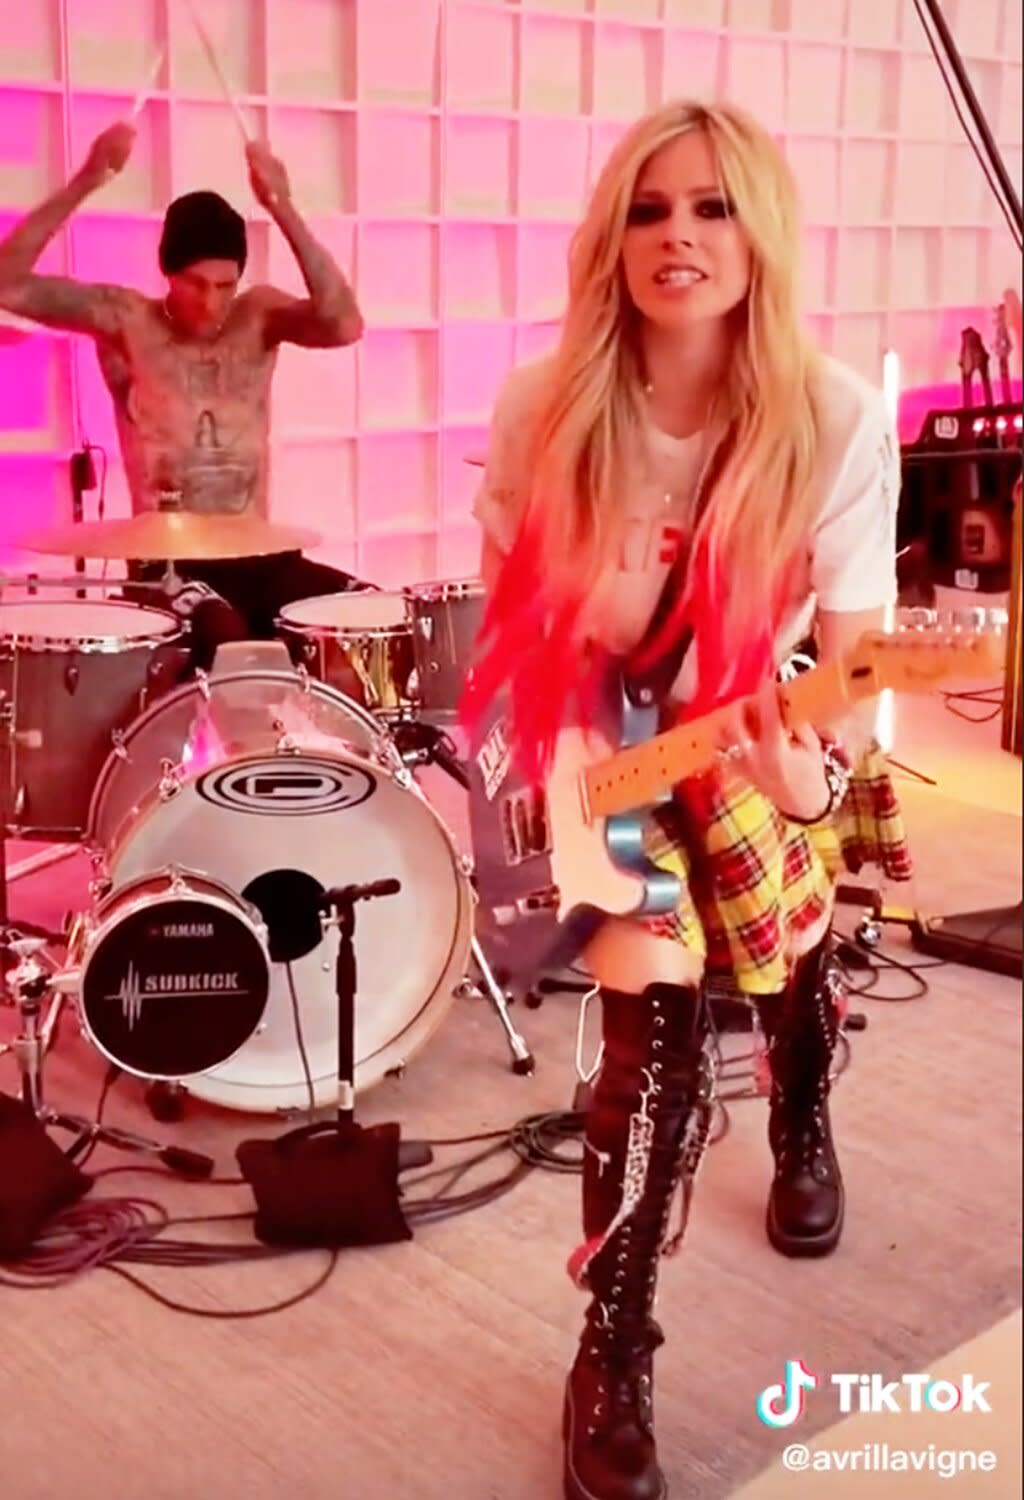 Avril Lavigne Tells Travis Barker to 'Bite Me' as They Tease New Collab on TikTok